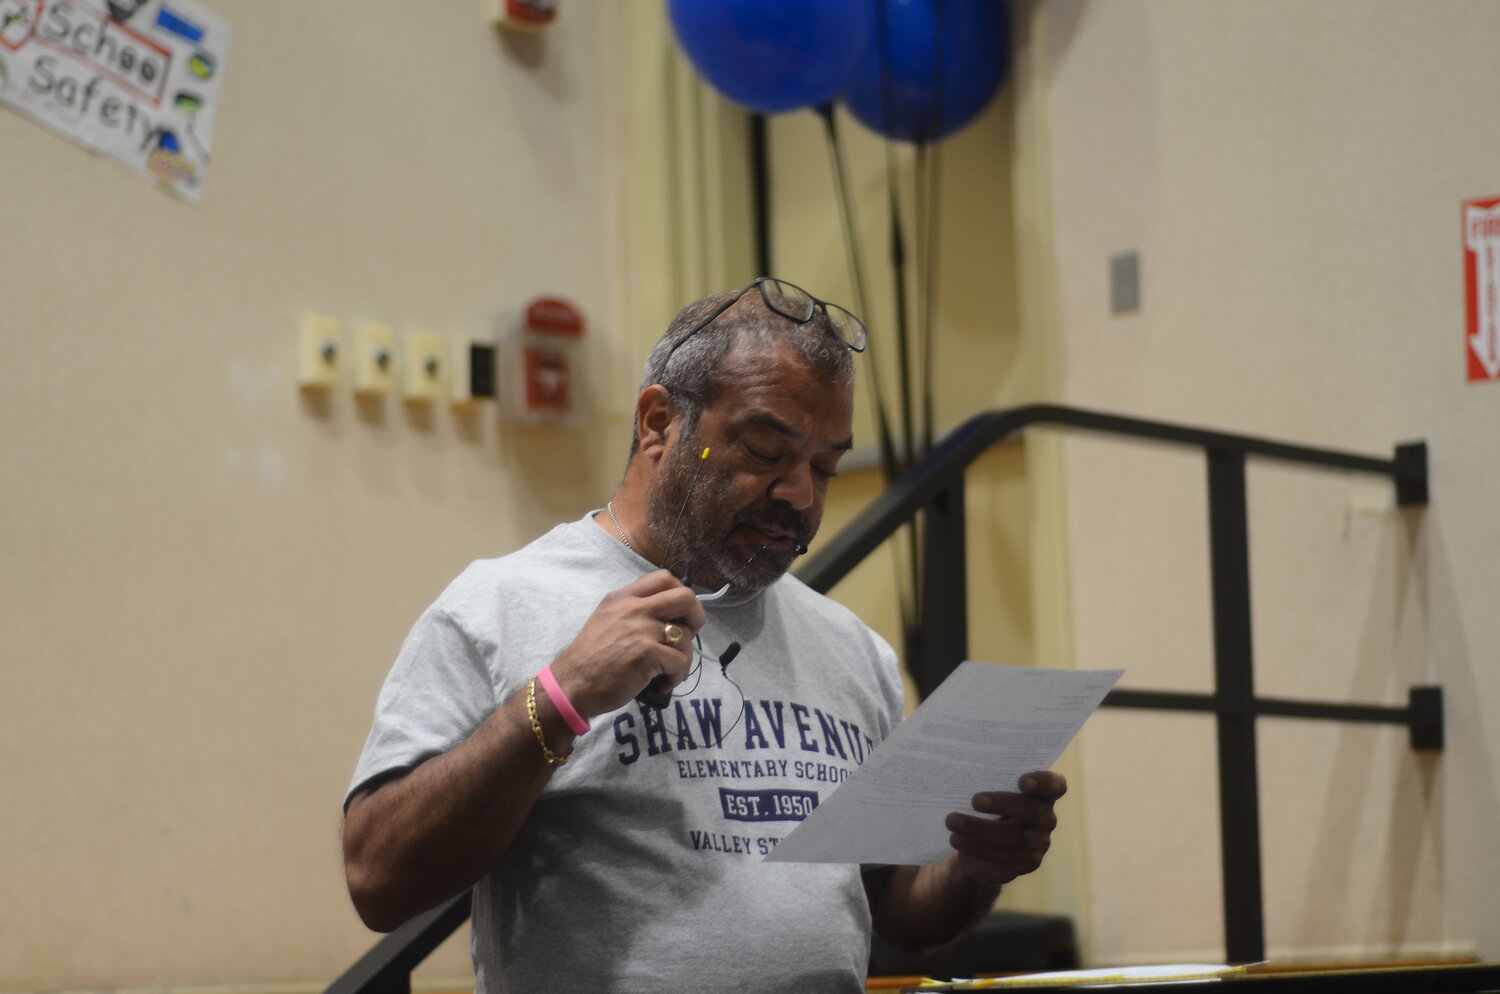 Shaw PTA President Jose Paulino urged the Valley Stream District 30 Board of Education to refrain from accepting Shaw Principal Christopher Colarossi’s resignation.